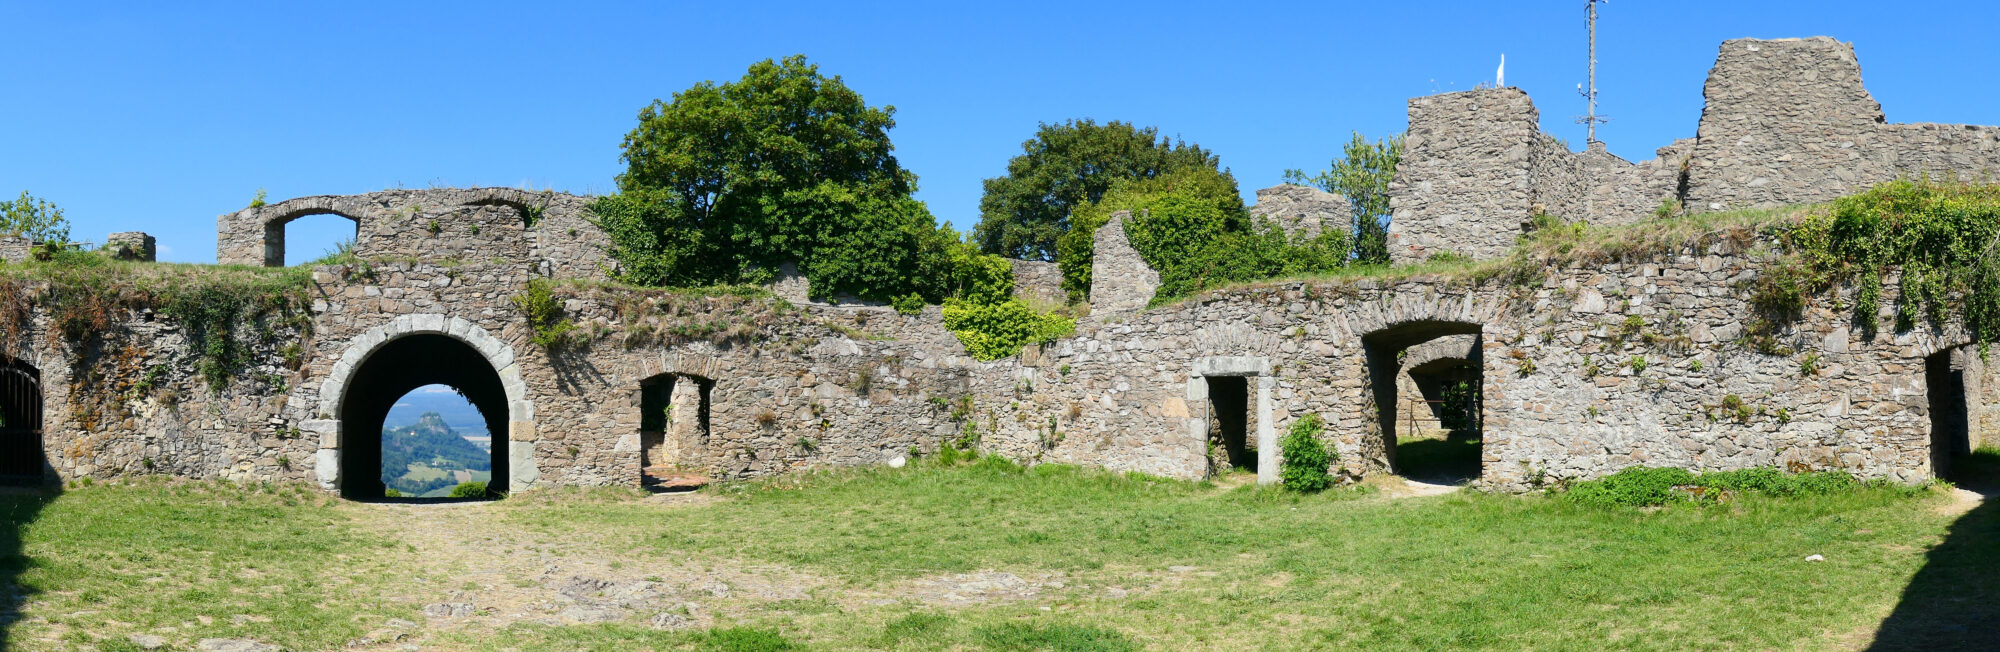 Inner castle at fortress Hohentwiel